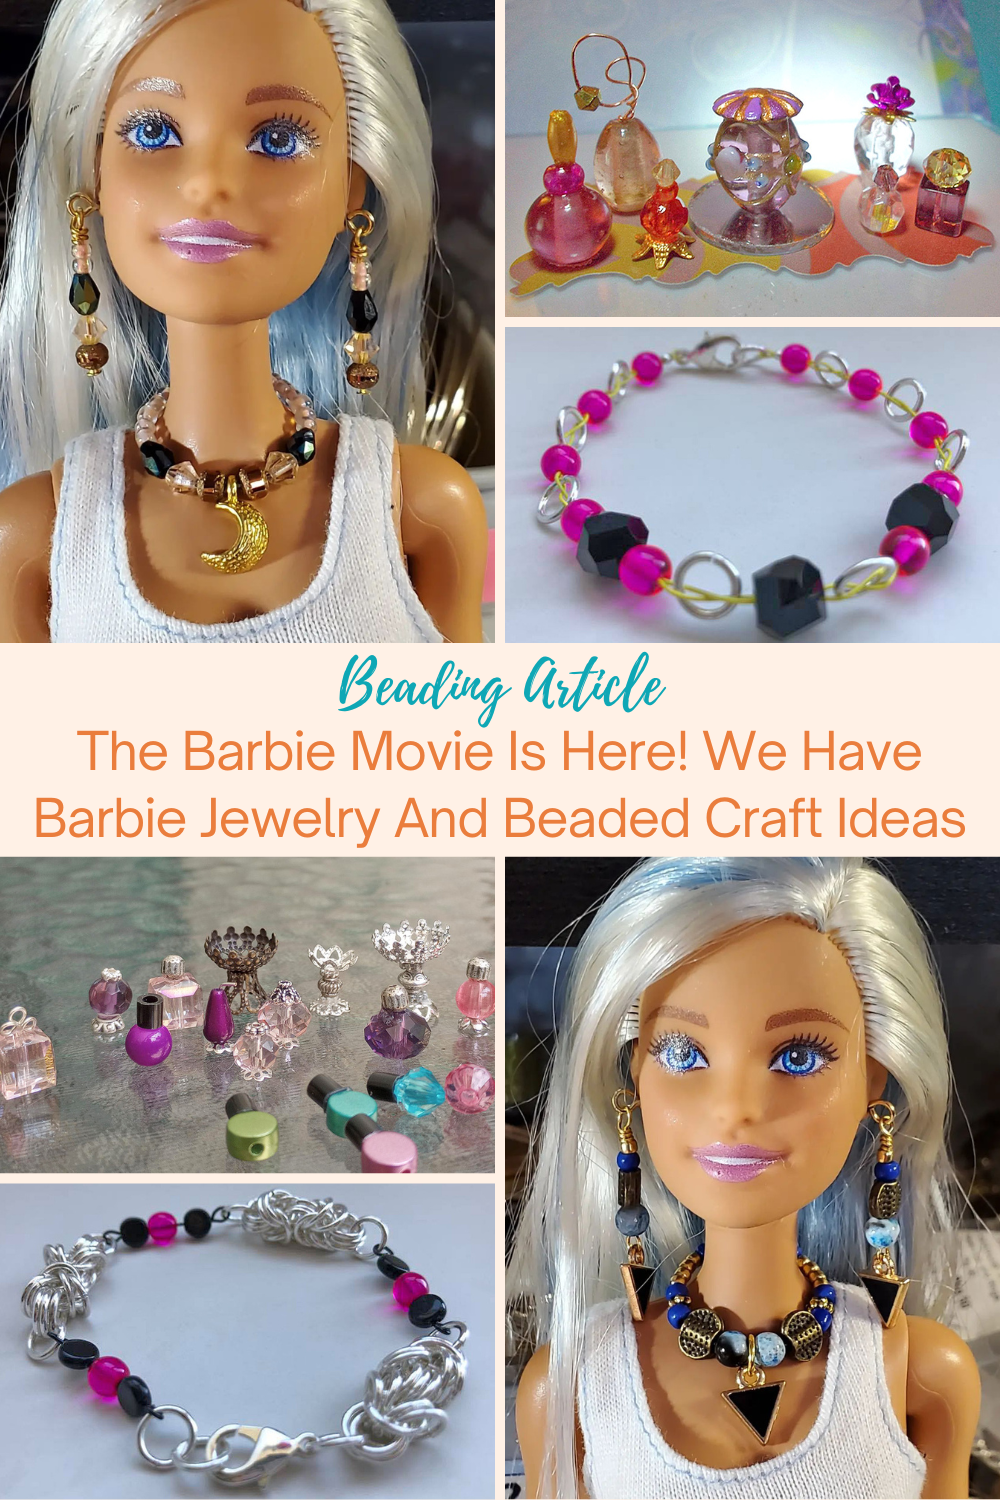 The Barbie Movie Is Here! We Have Barbie Jewelry And Beaded Craft Ideas Collage